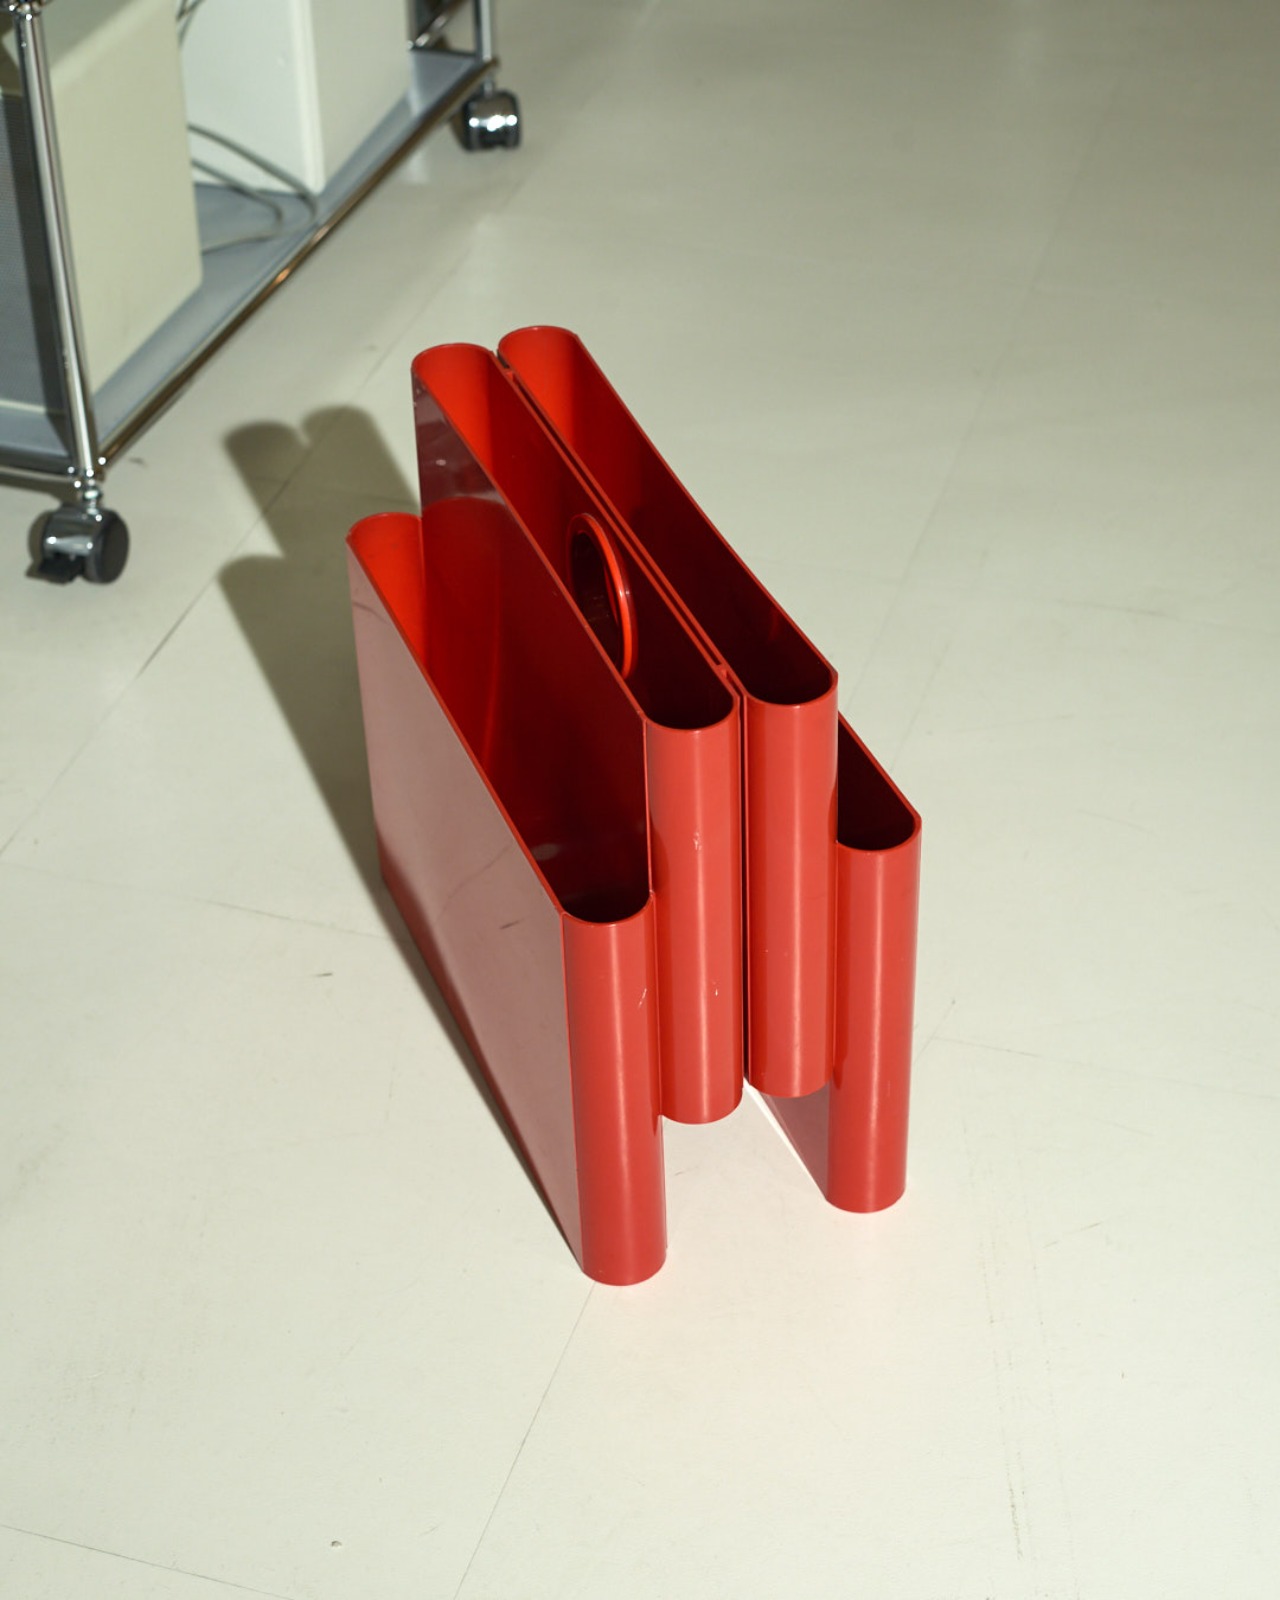 #7551 / Kartell 4676 Magazine Rack By Giotto Stoppino (red)